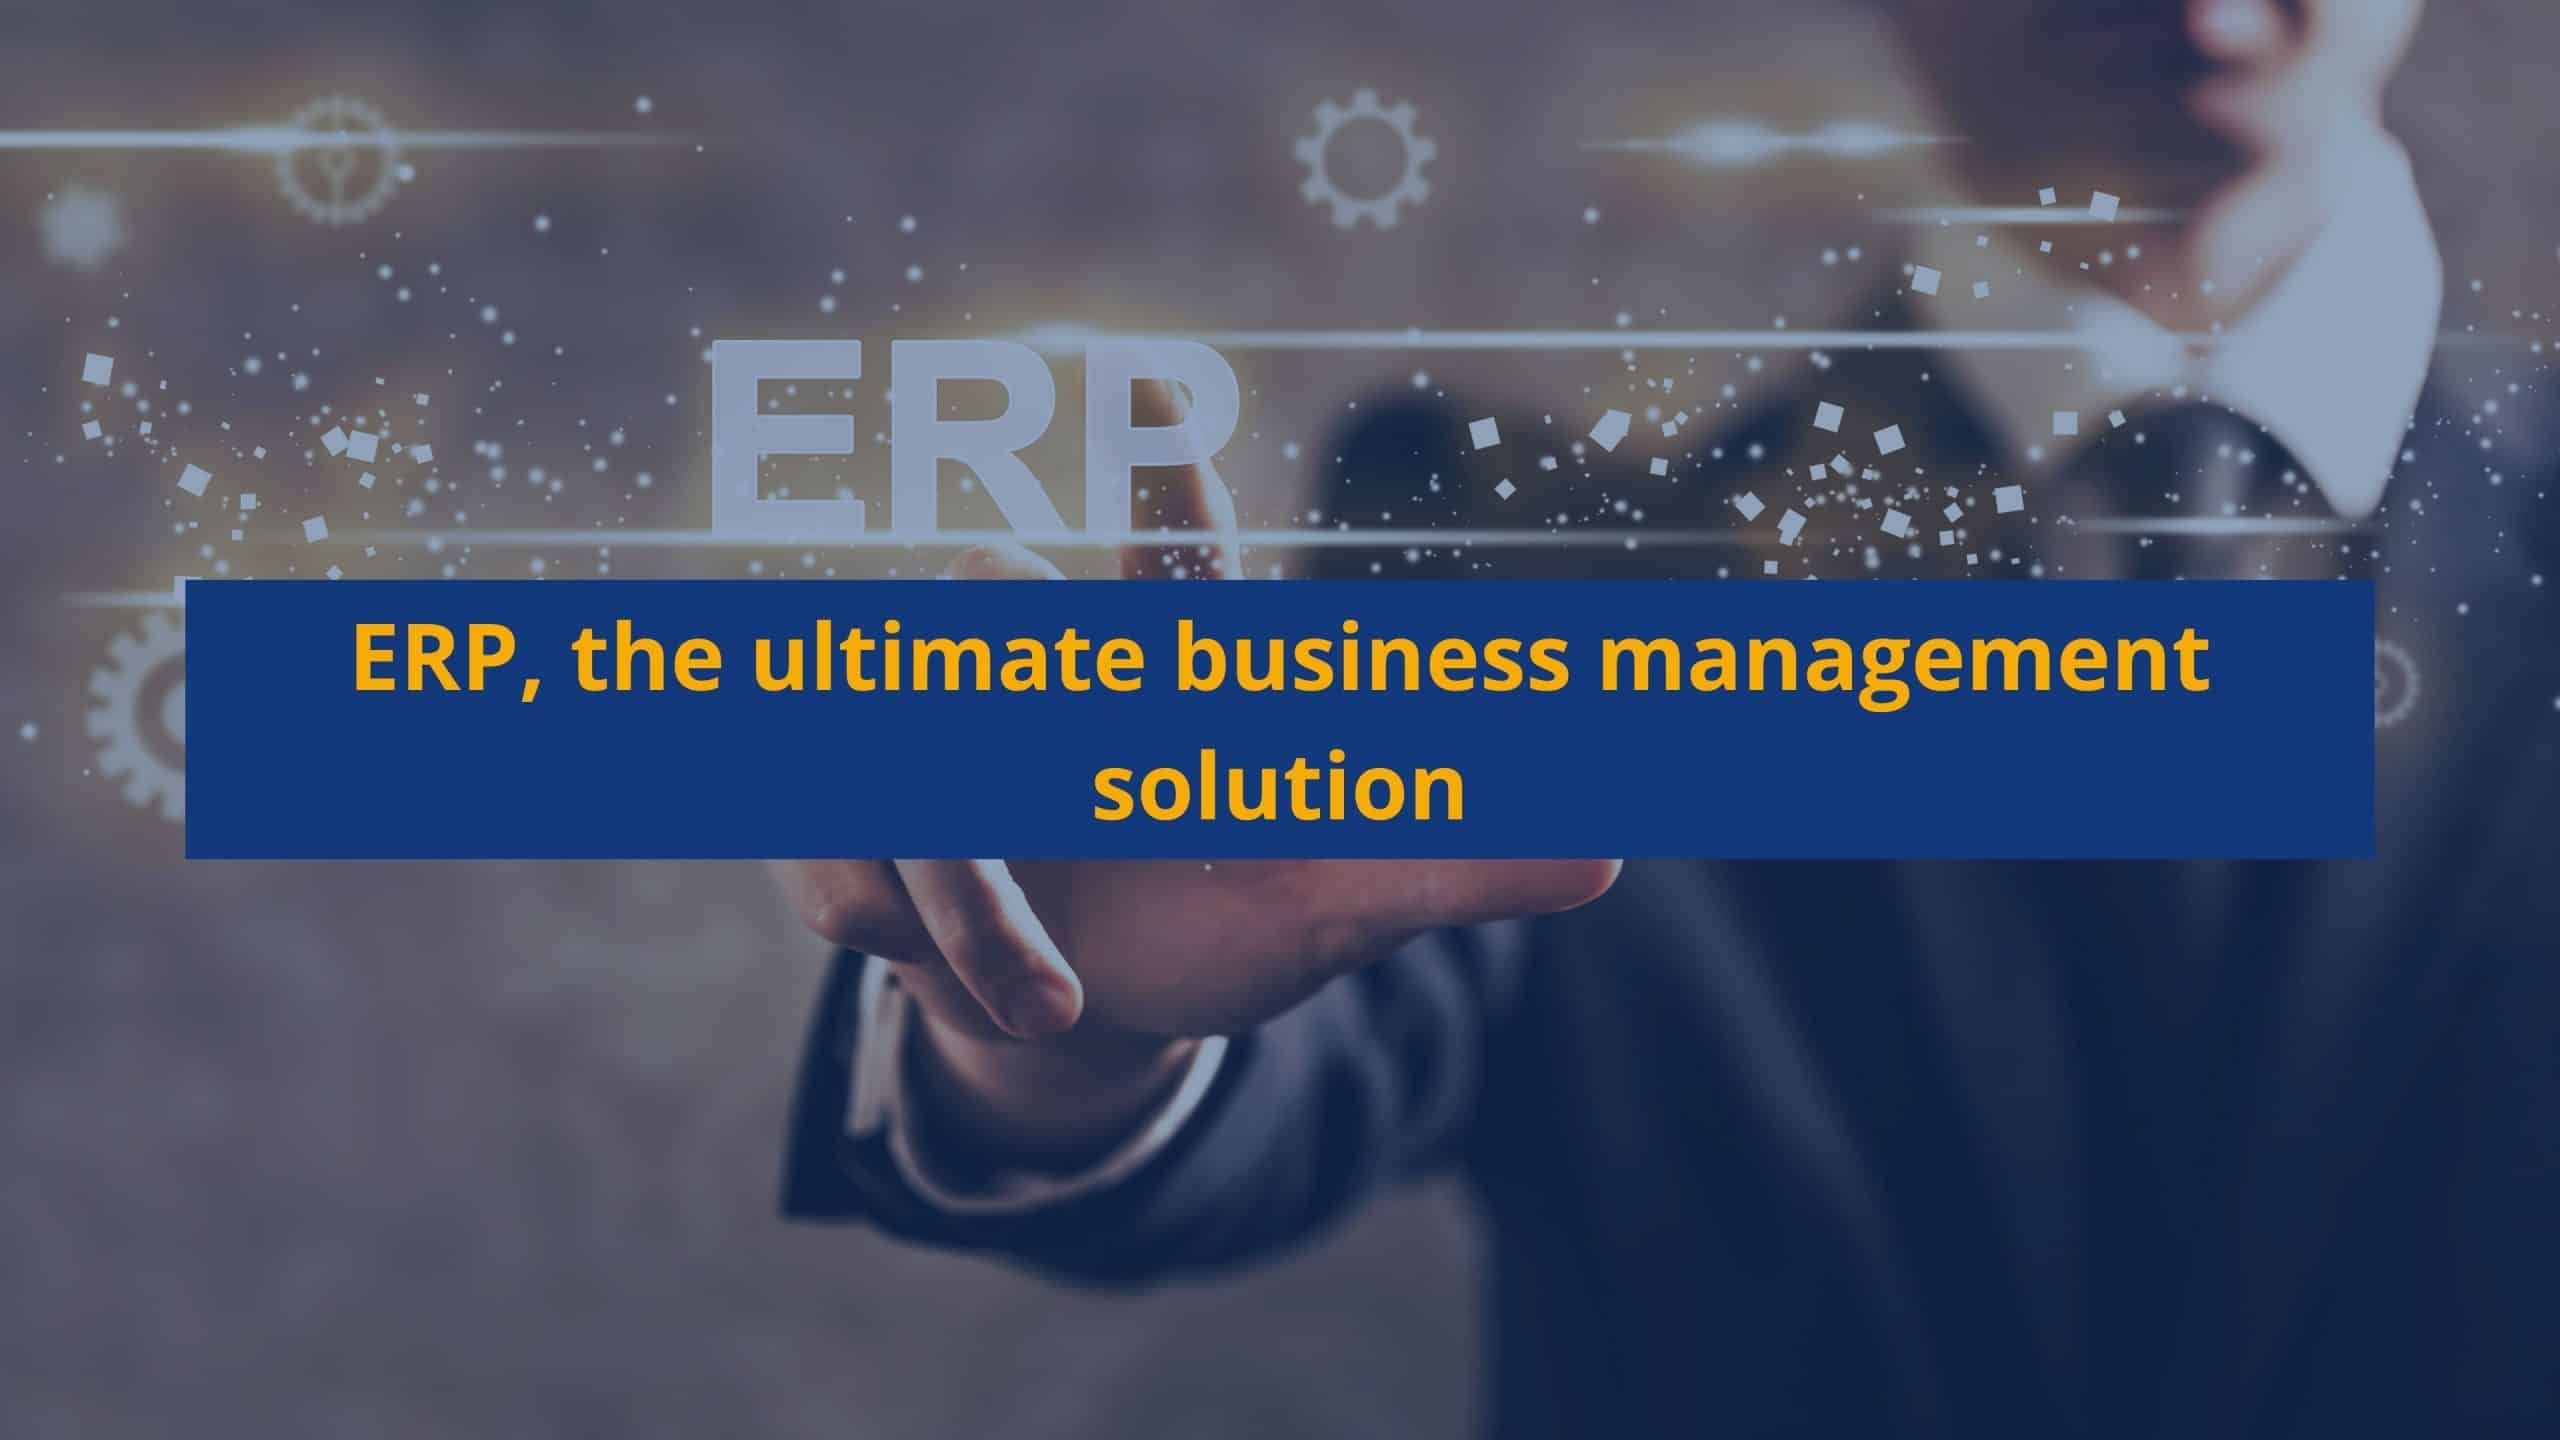 ERP, the ultimate business management solution